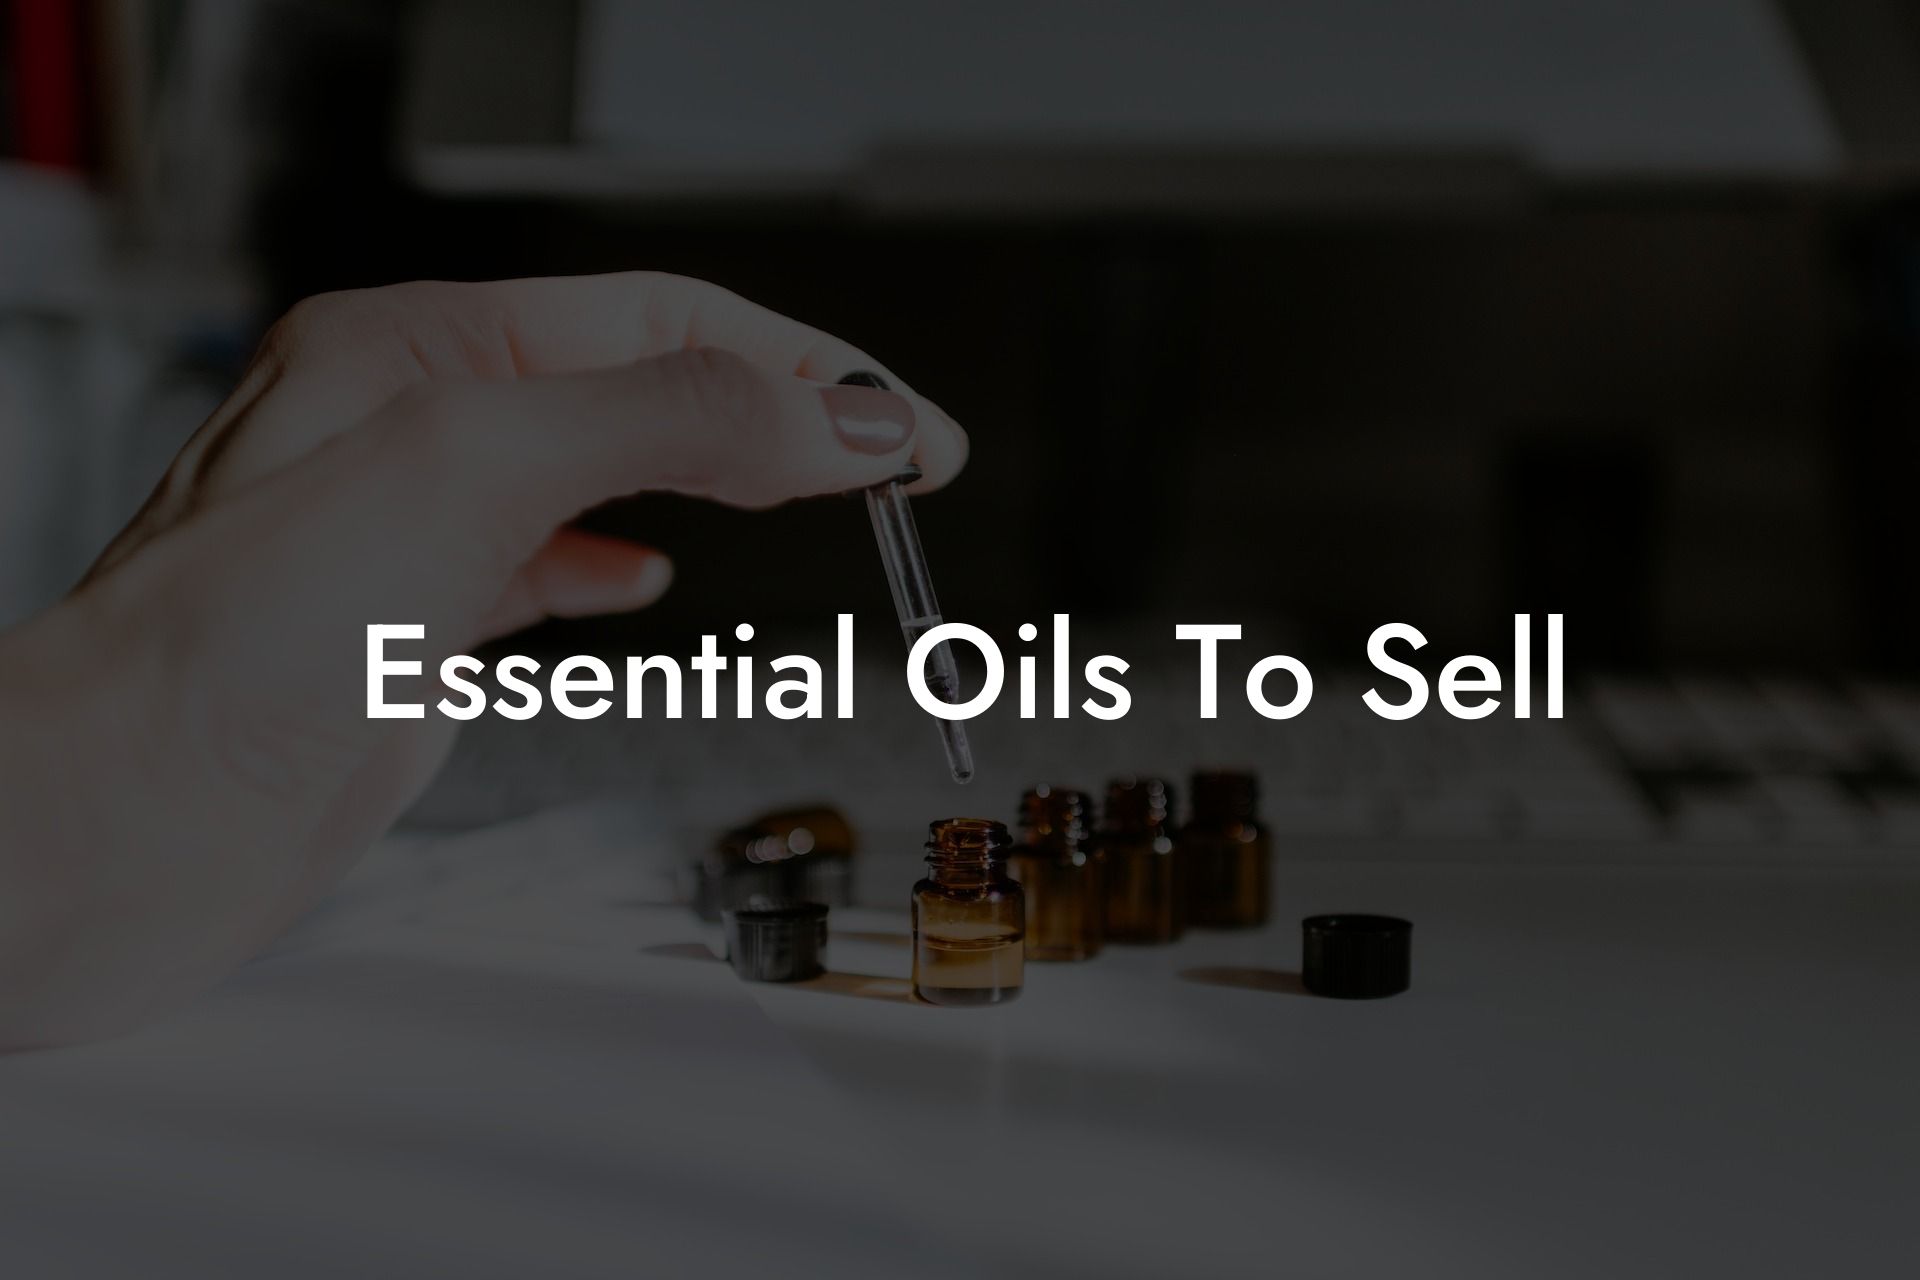 Essential Oils To Sell